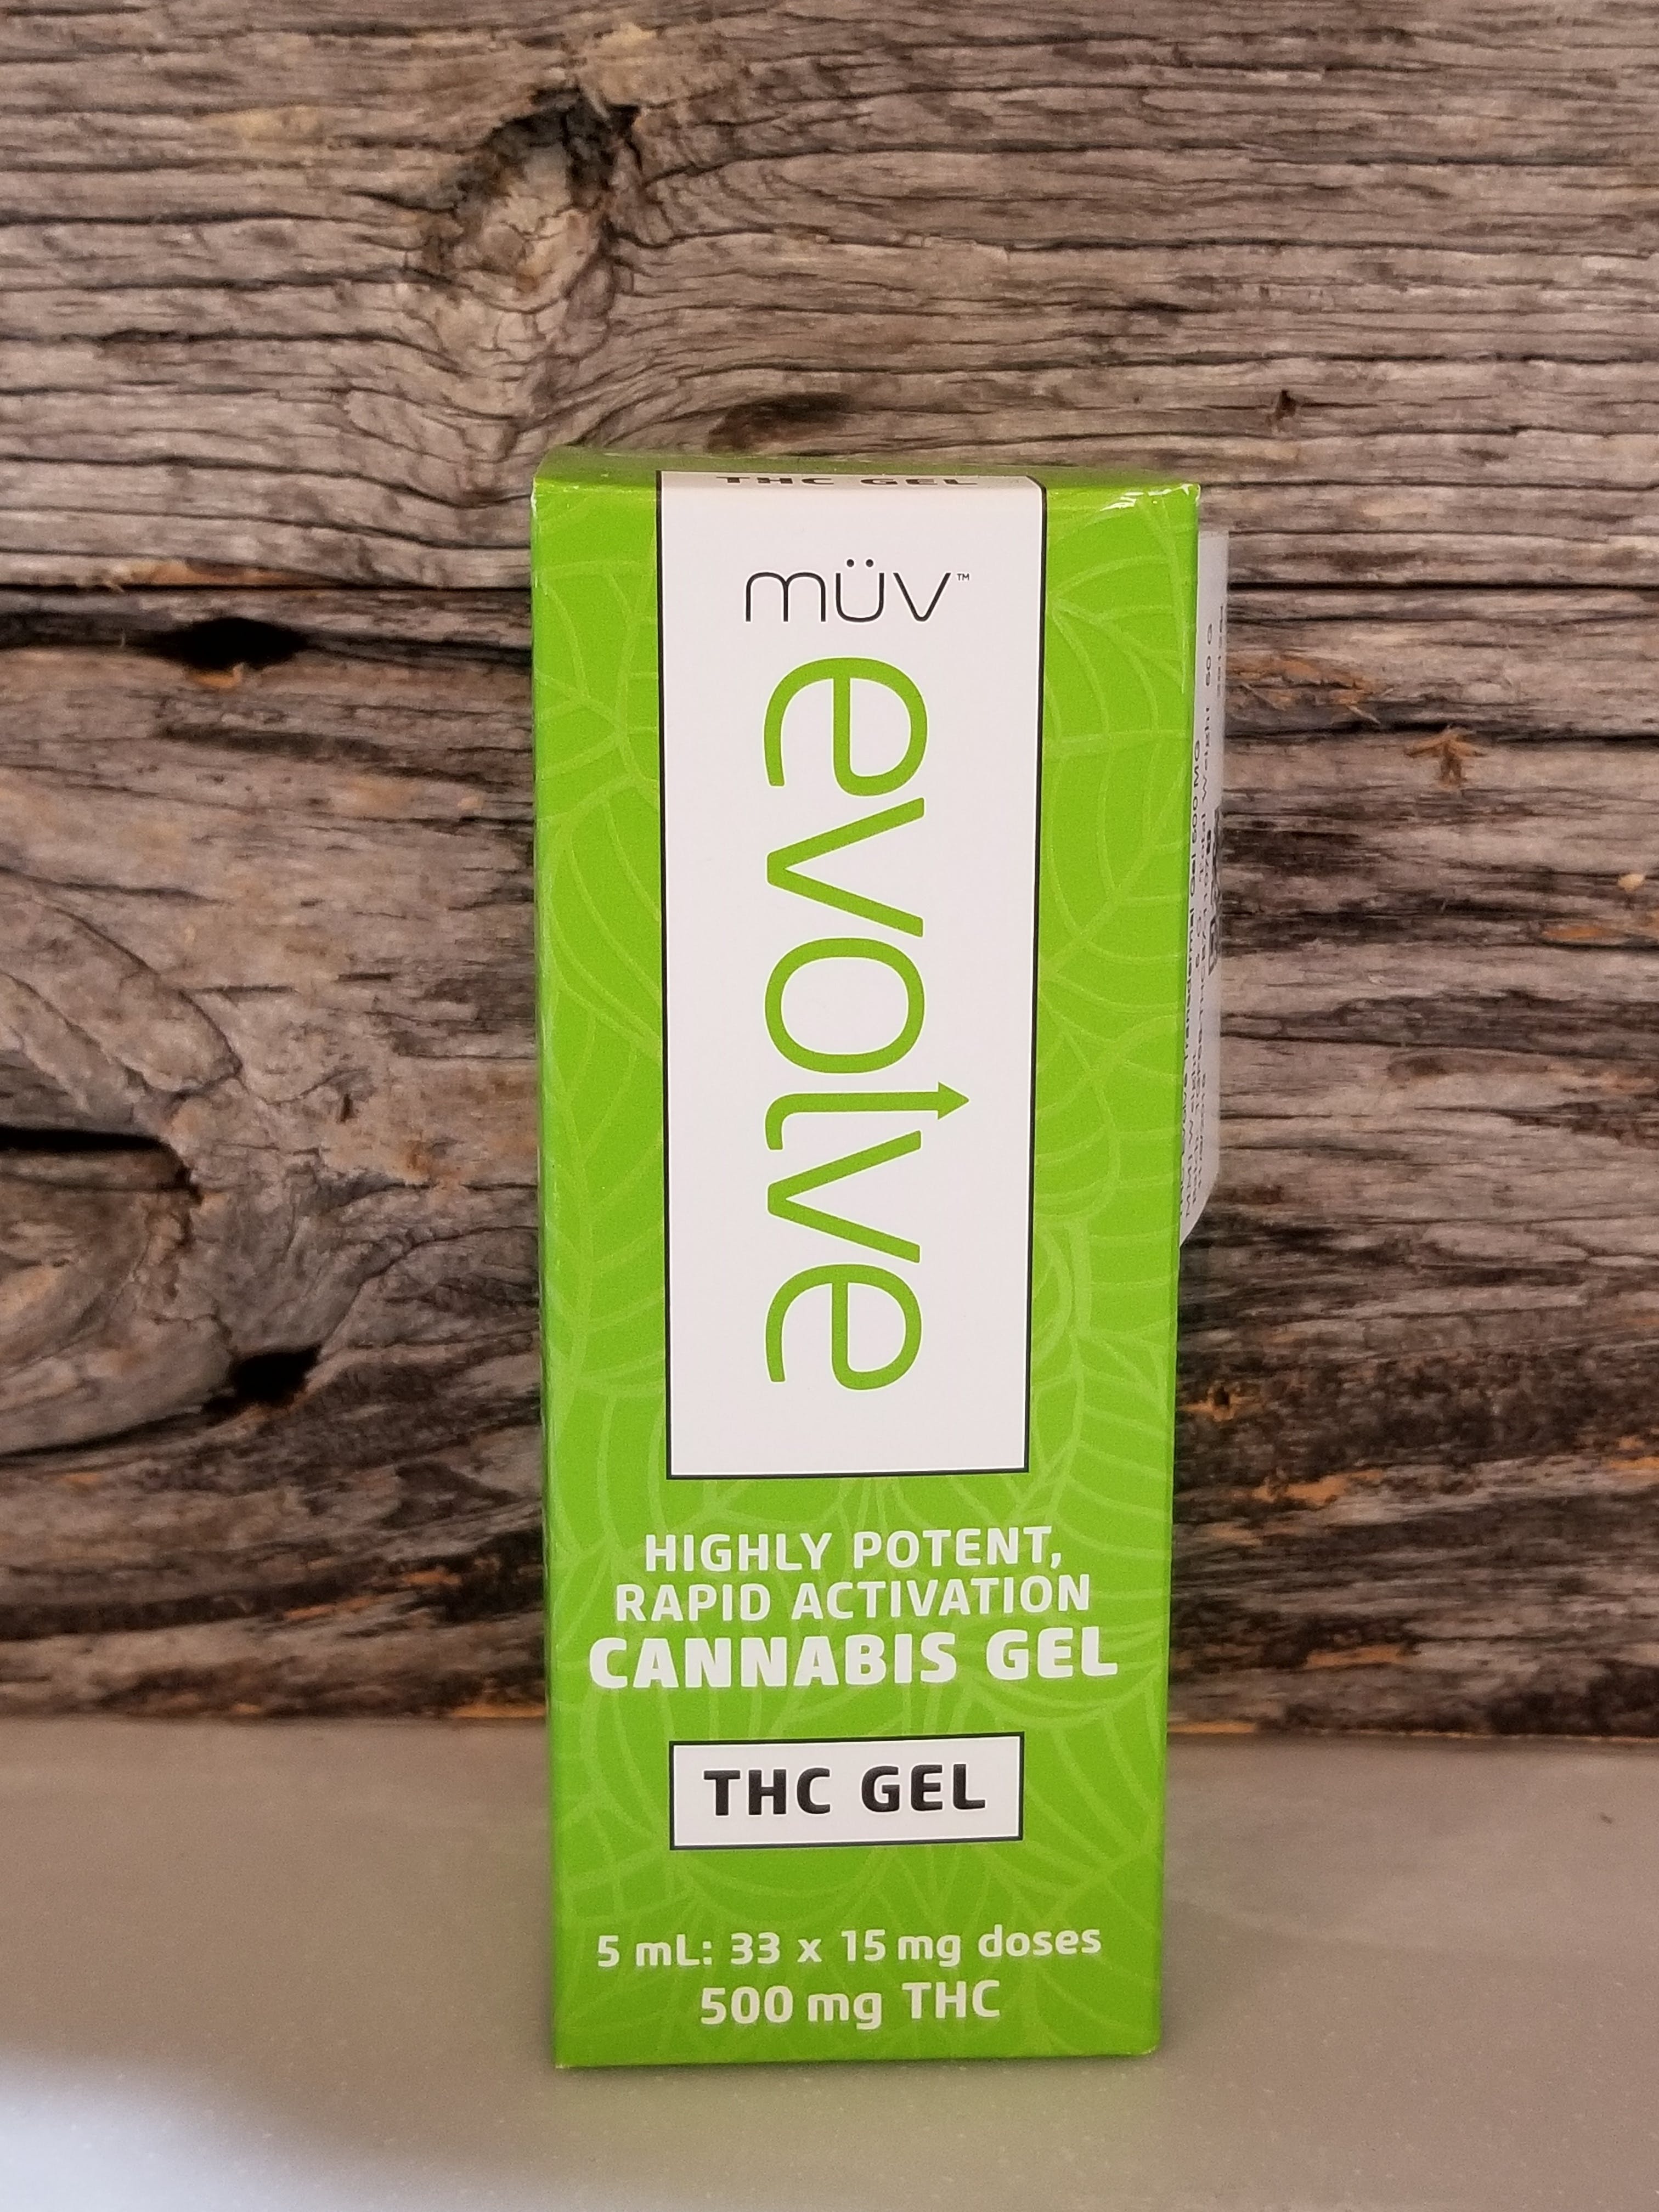 topicals-ma-c2-9cv-cannabis-infused-products-muv-thc-evolve-transdermal-gel-500mg